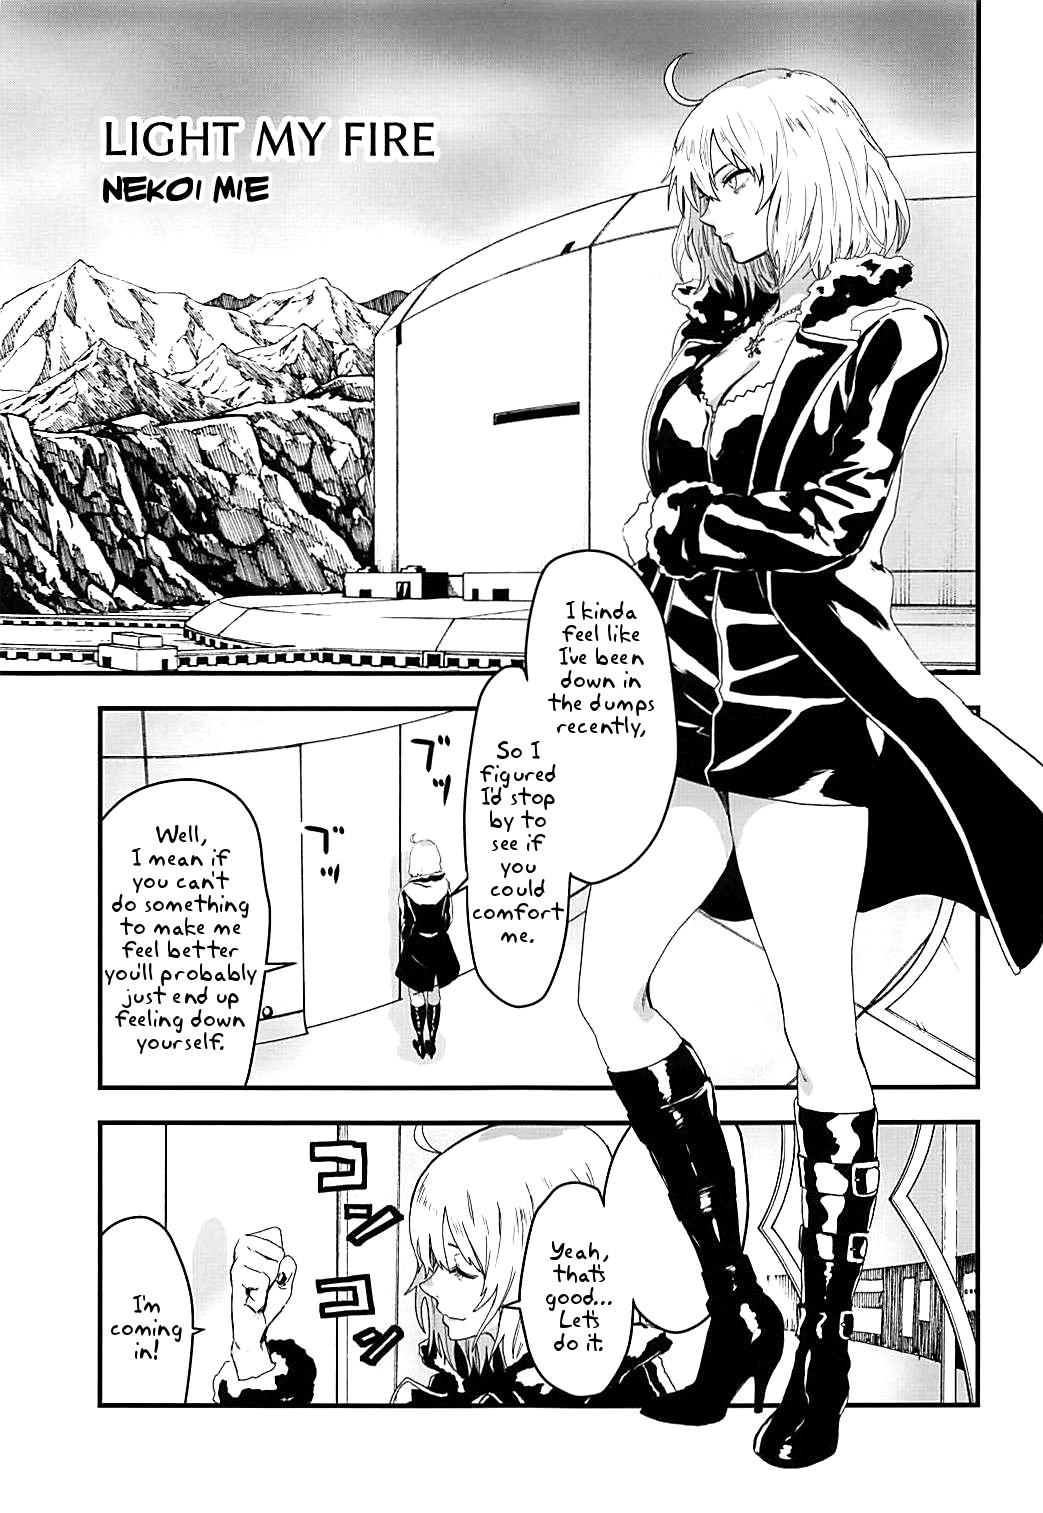 Student LIGHT MY FIRE - Fate grand order Dick - Page 2